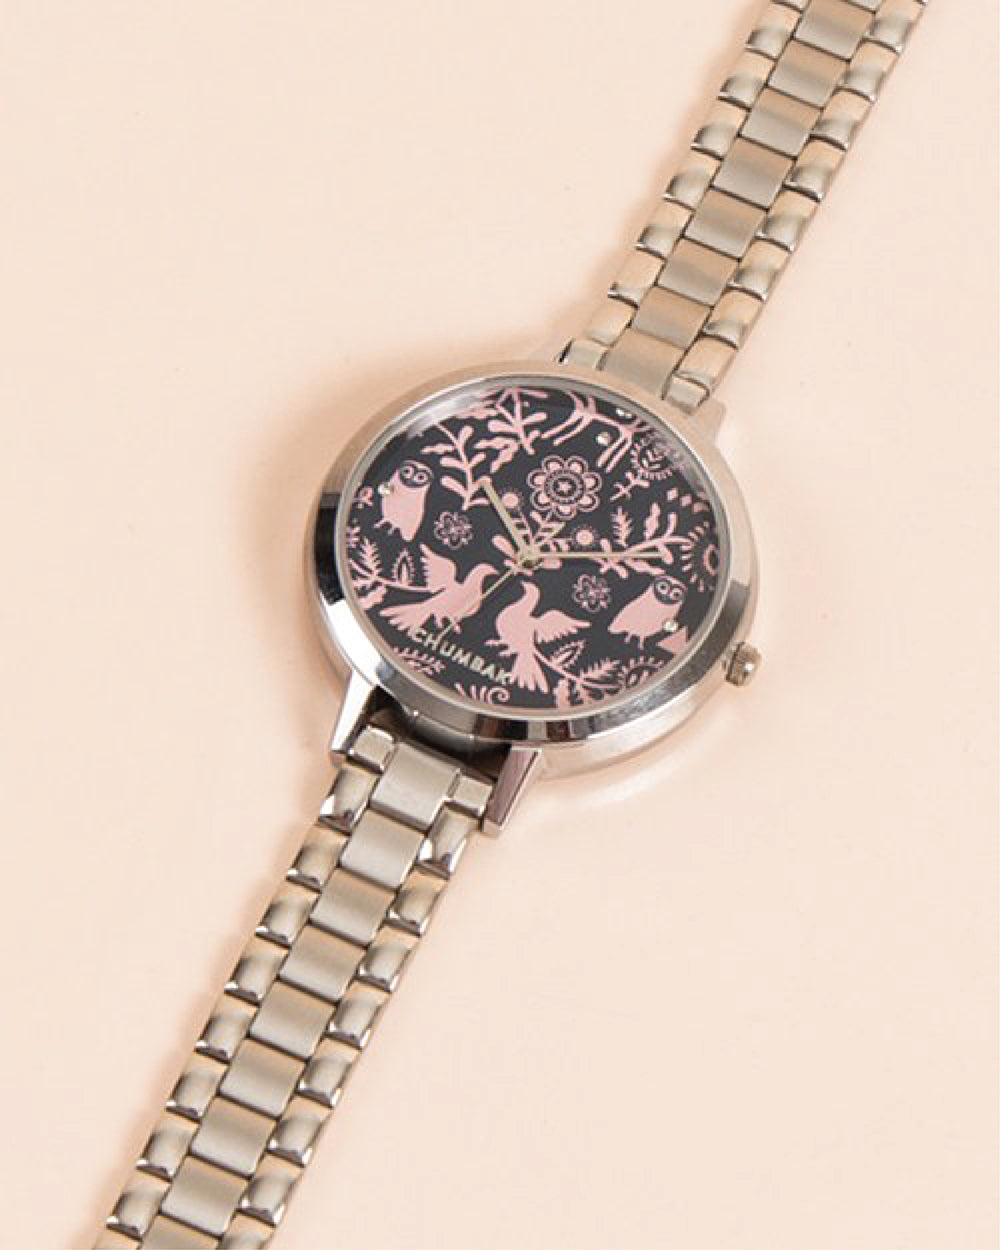 Floral Birds Stainless Steel Wrist Watch With Bracelet